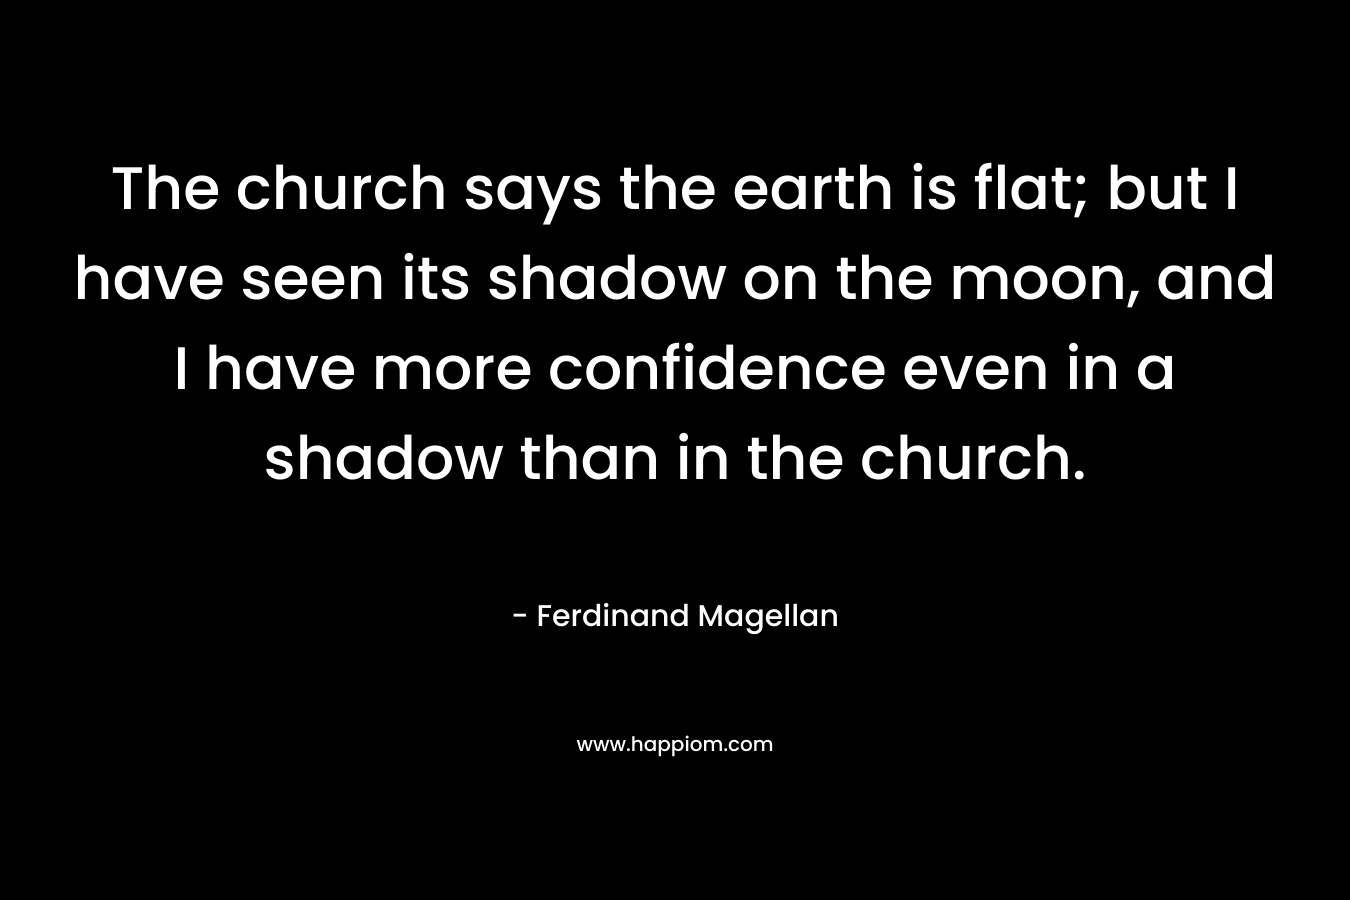 The church says the earth is flat; but I have seen its shadow on the moon, and I have more confidence even in a shadow than in the church.